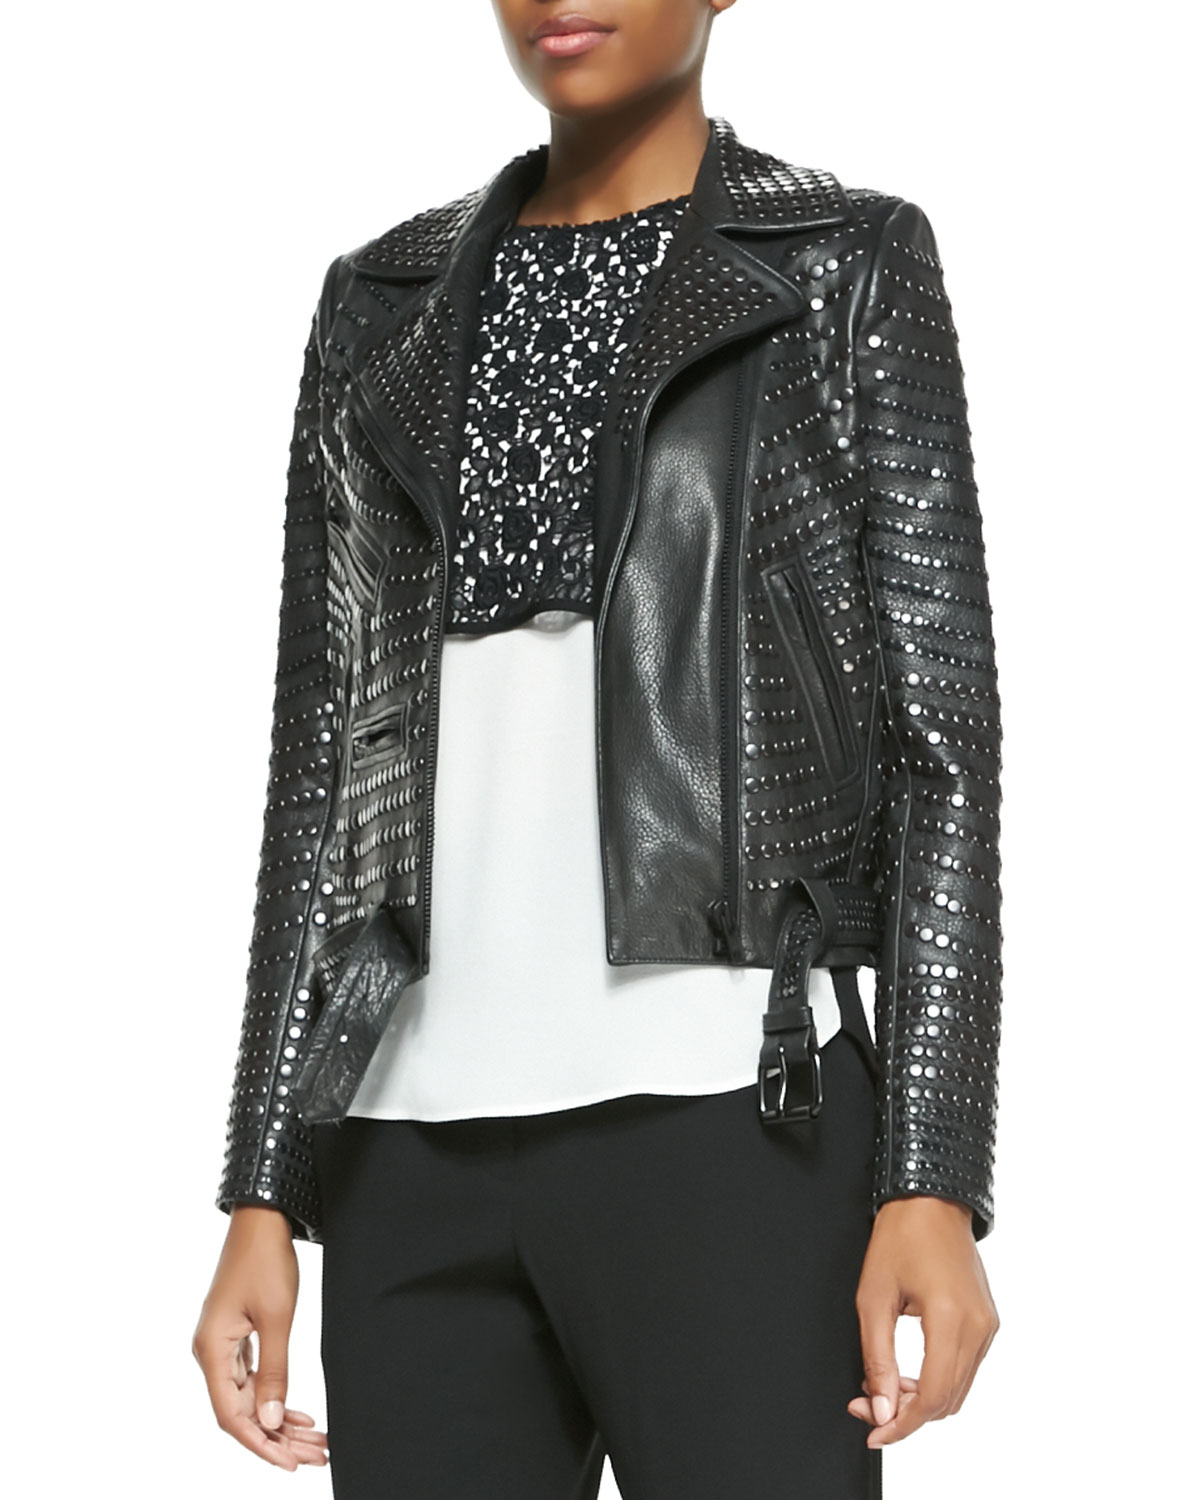 Lyst - A.L.C. Night Studded Leather Moto Jacket in Black